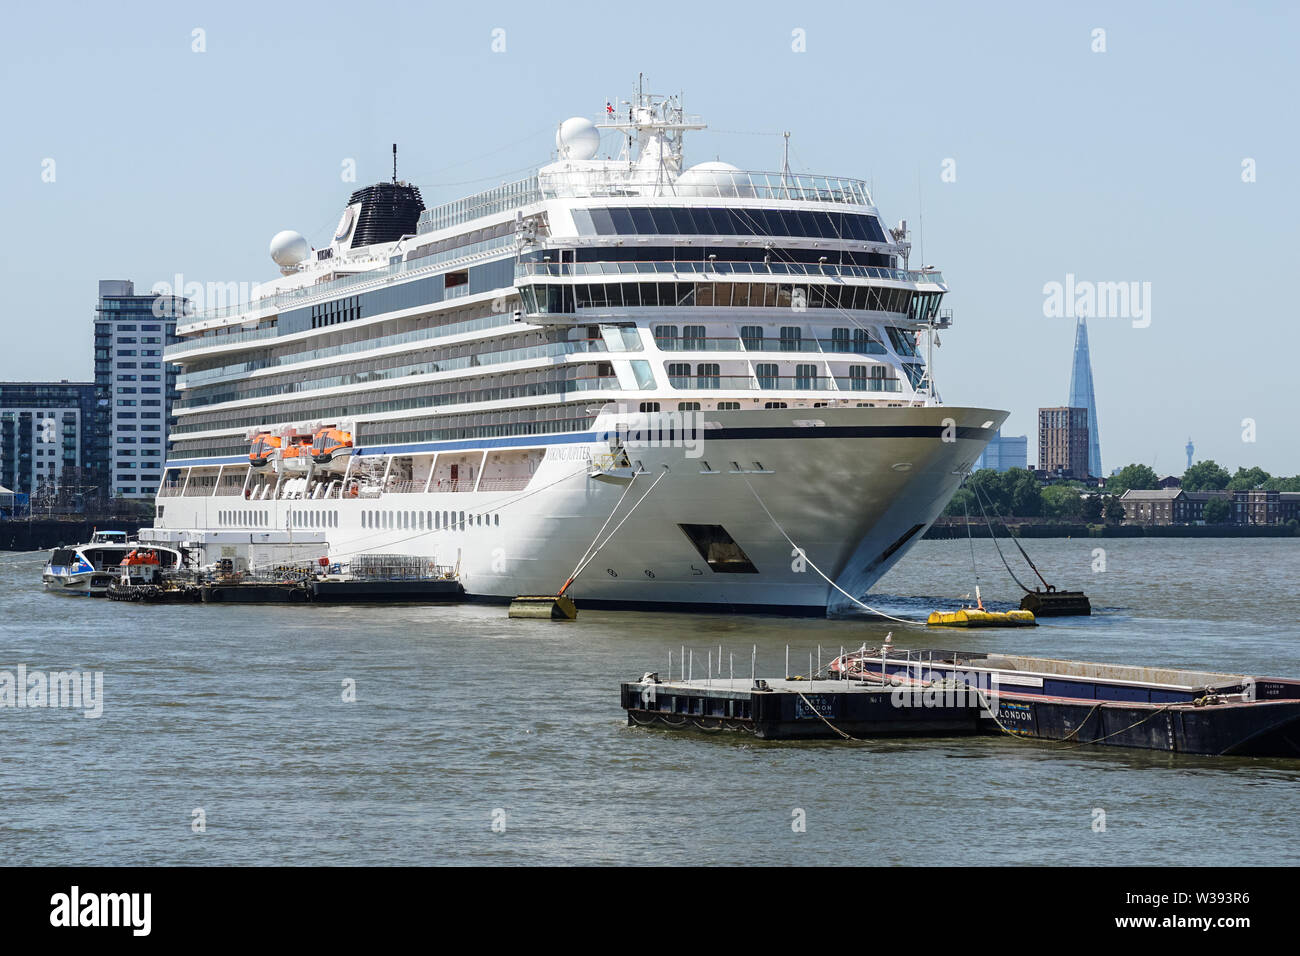 The Viking Star cruise ship moored at Greenwich in London, England, United Kingdom, UK Stock Photo